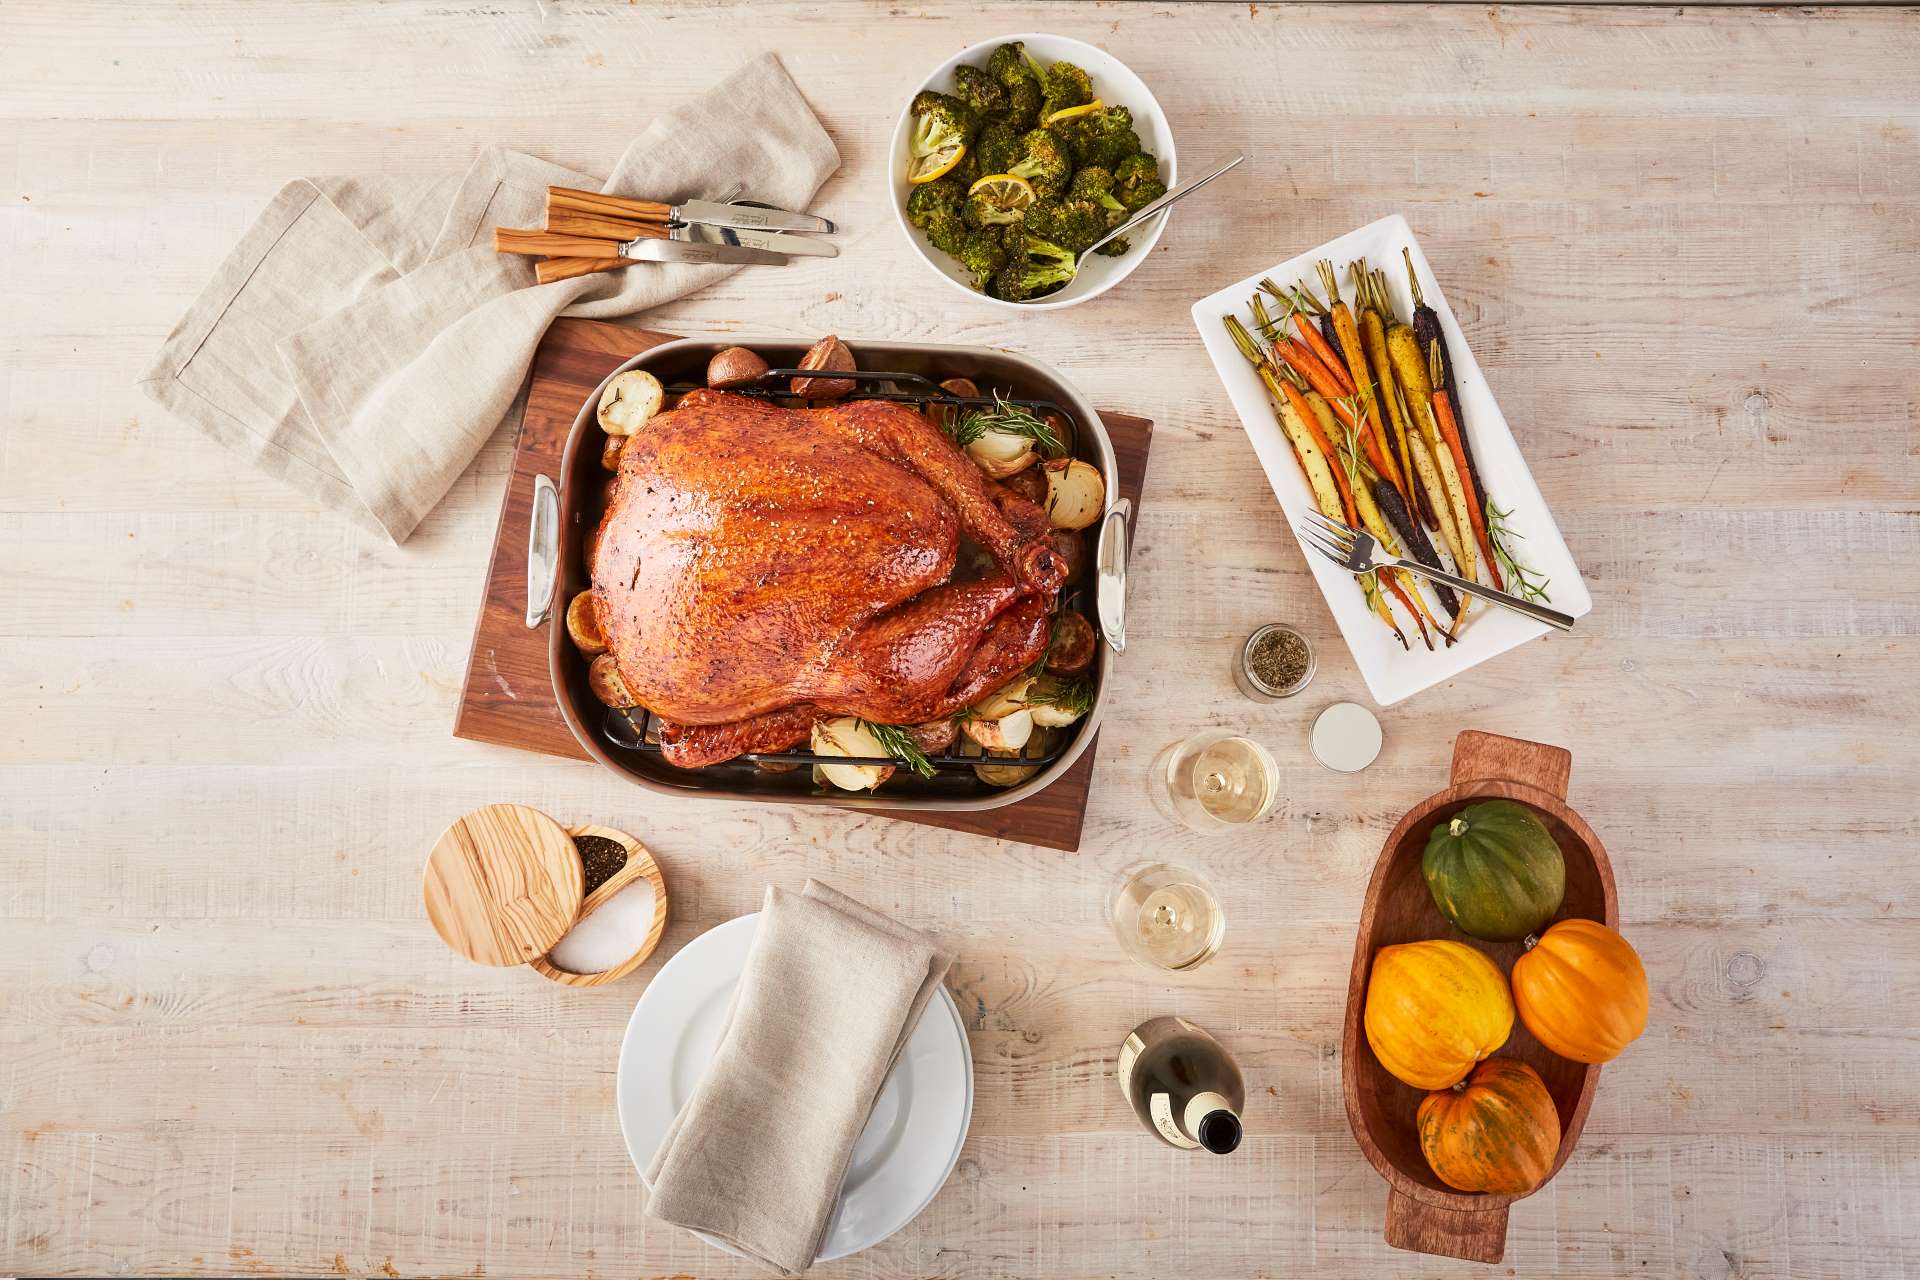 How to Plan Your Thanksgiving Menu